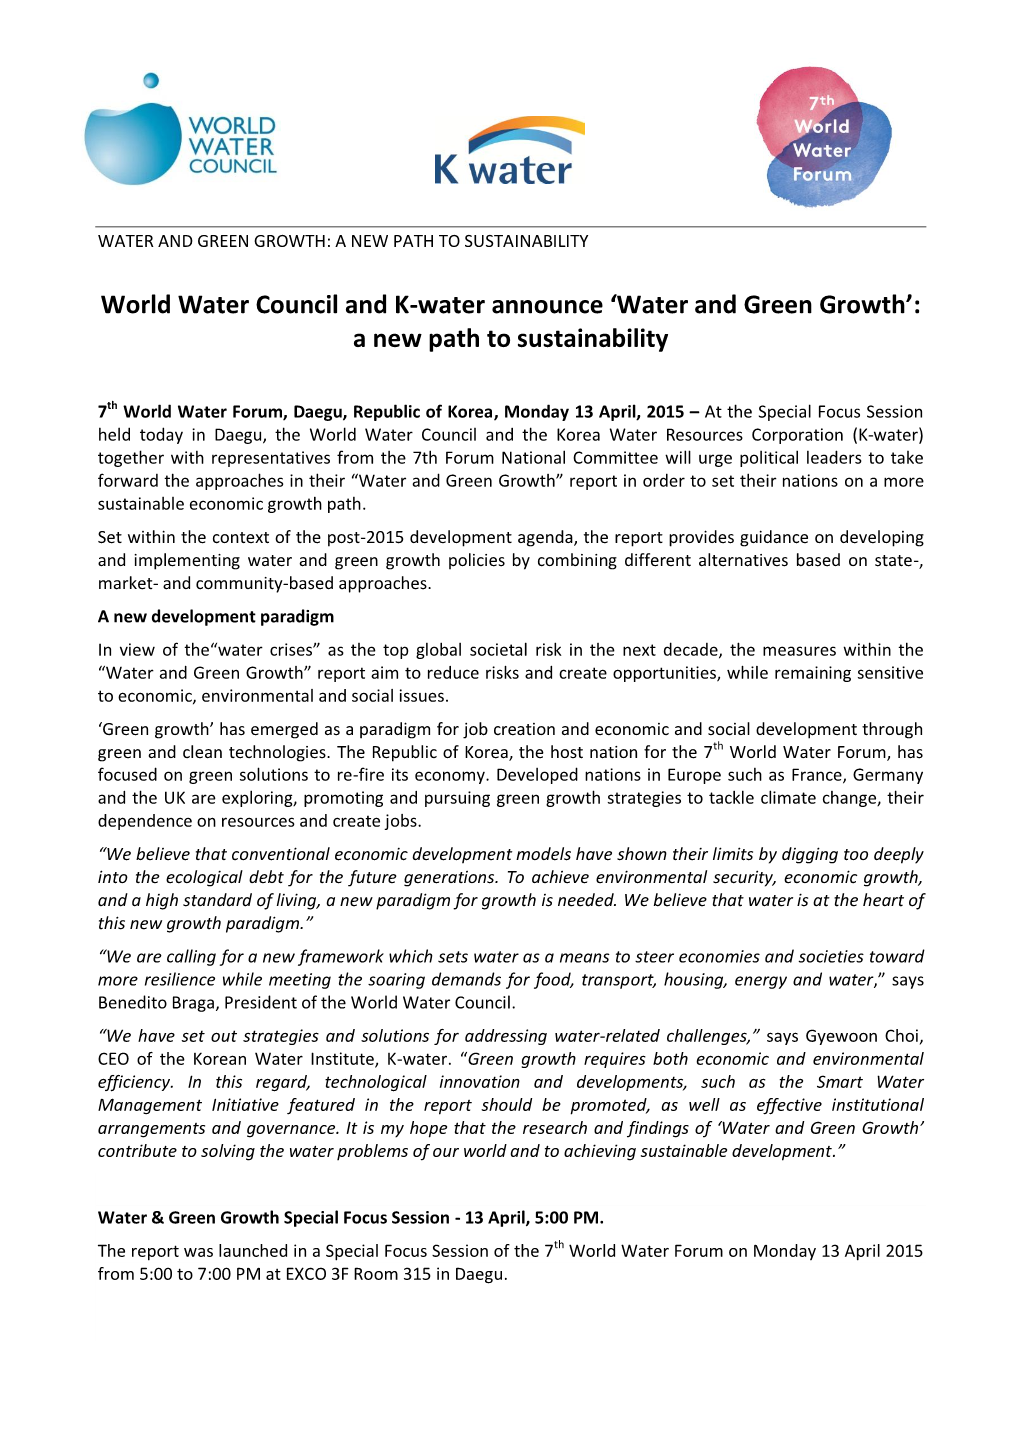 WWC and K-Water Announce New Path To